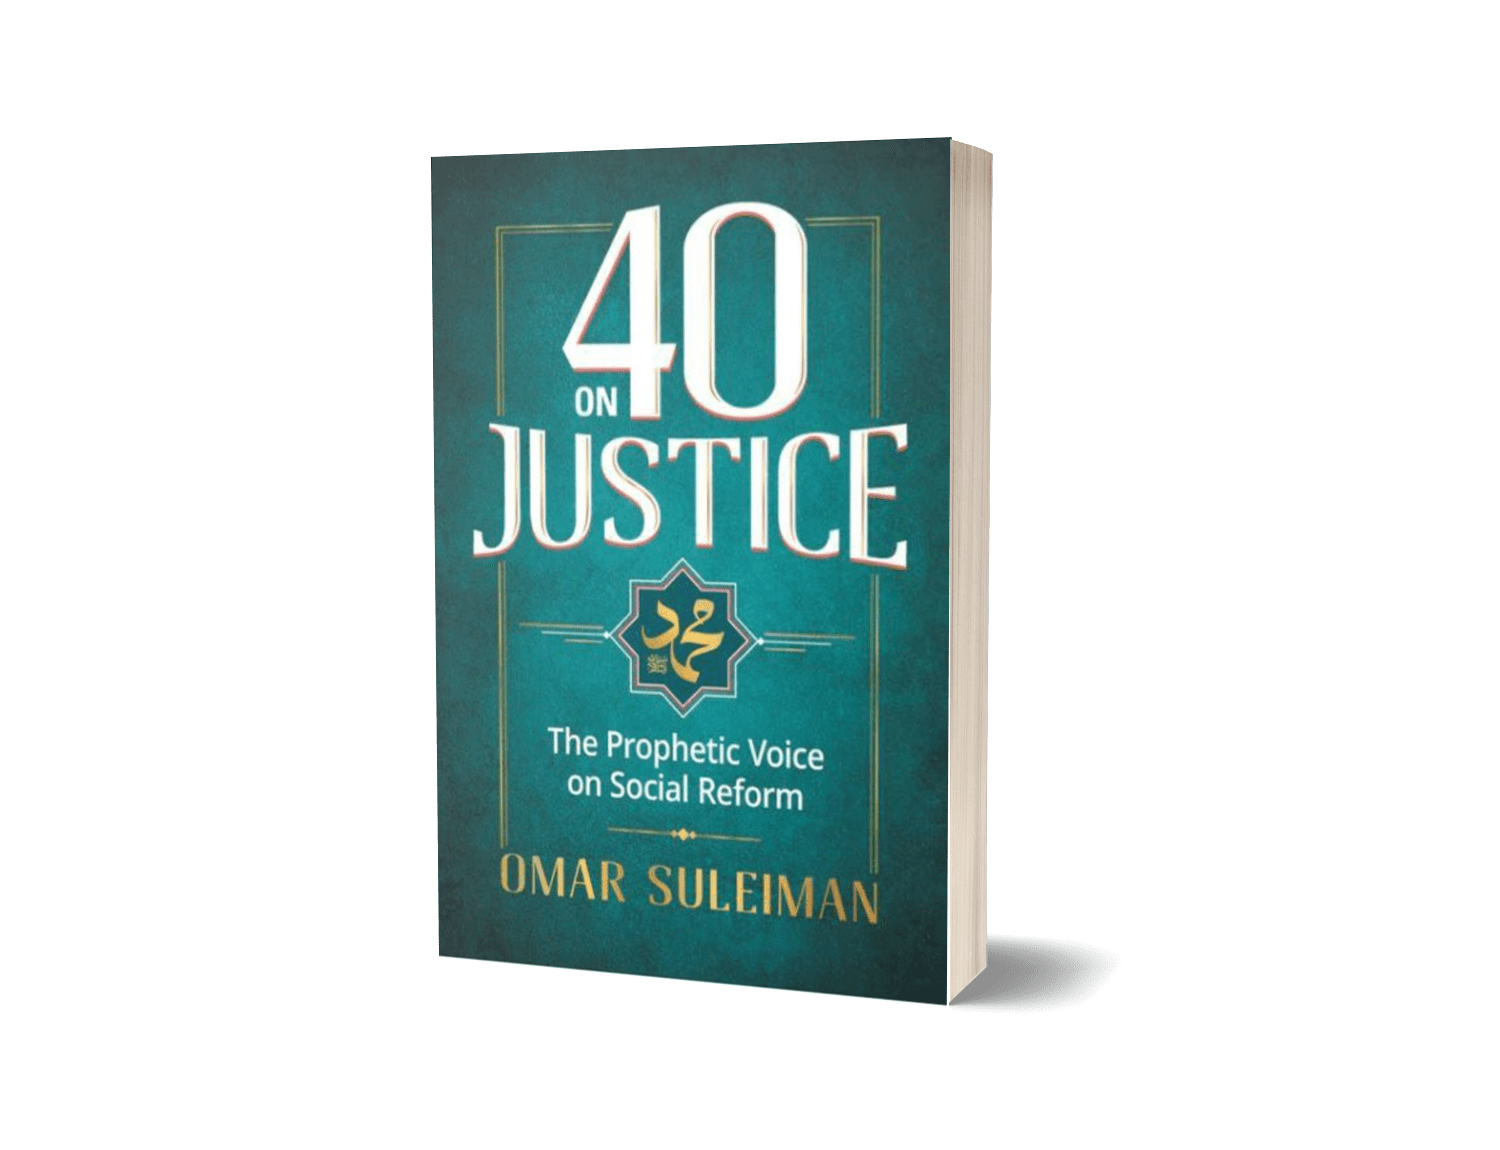 40 on Justice by Omar Suleiman